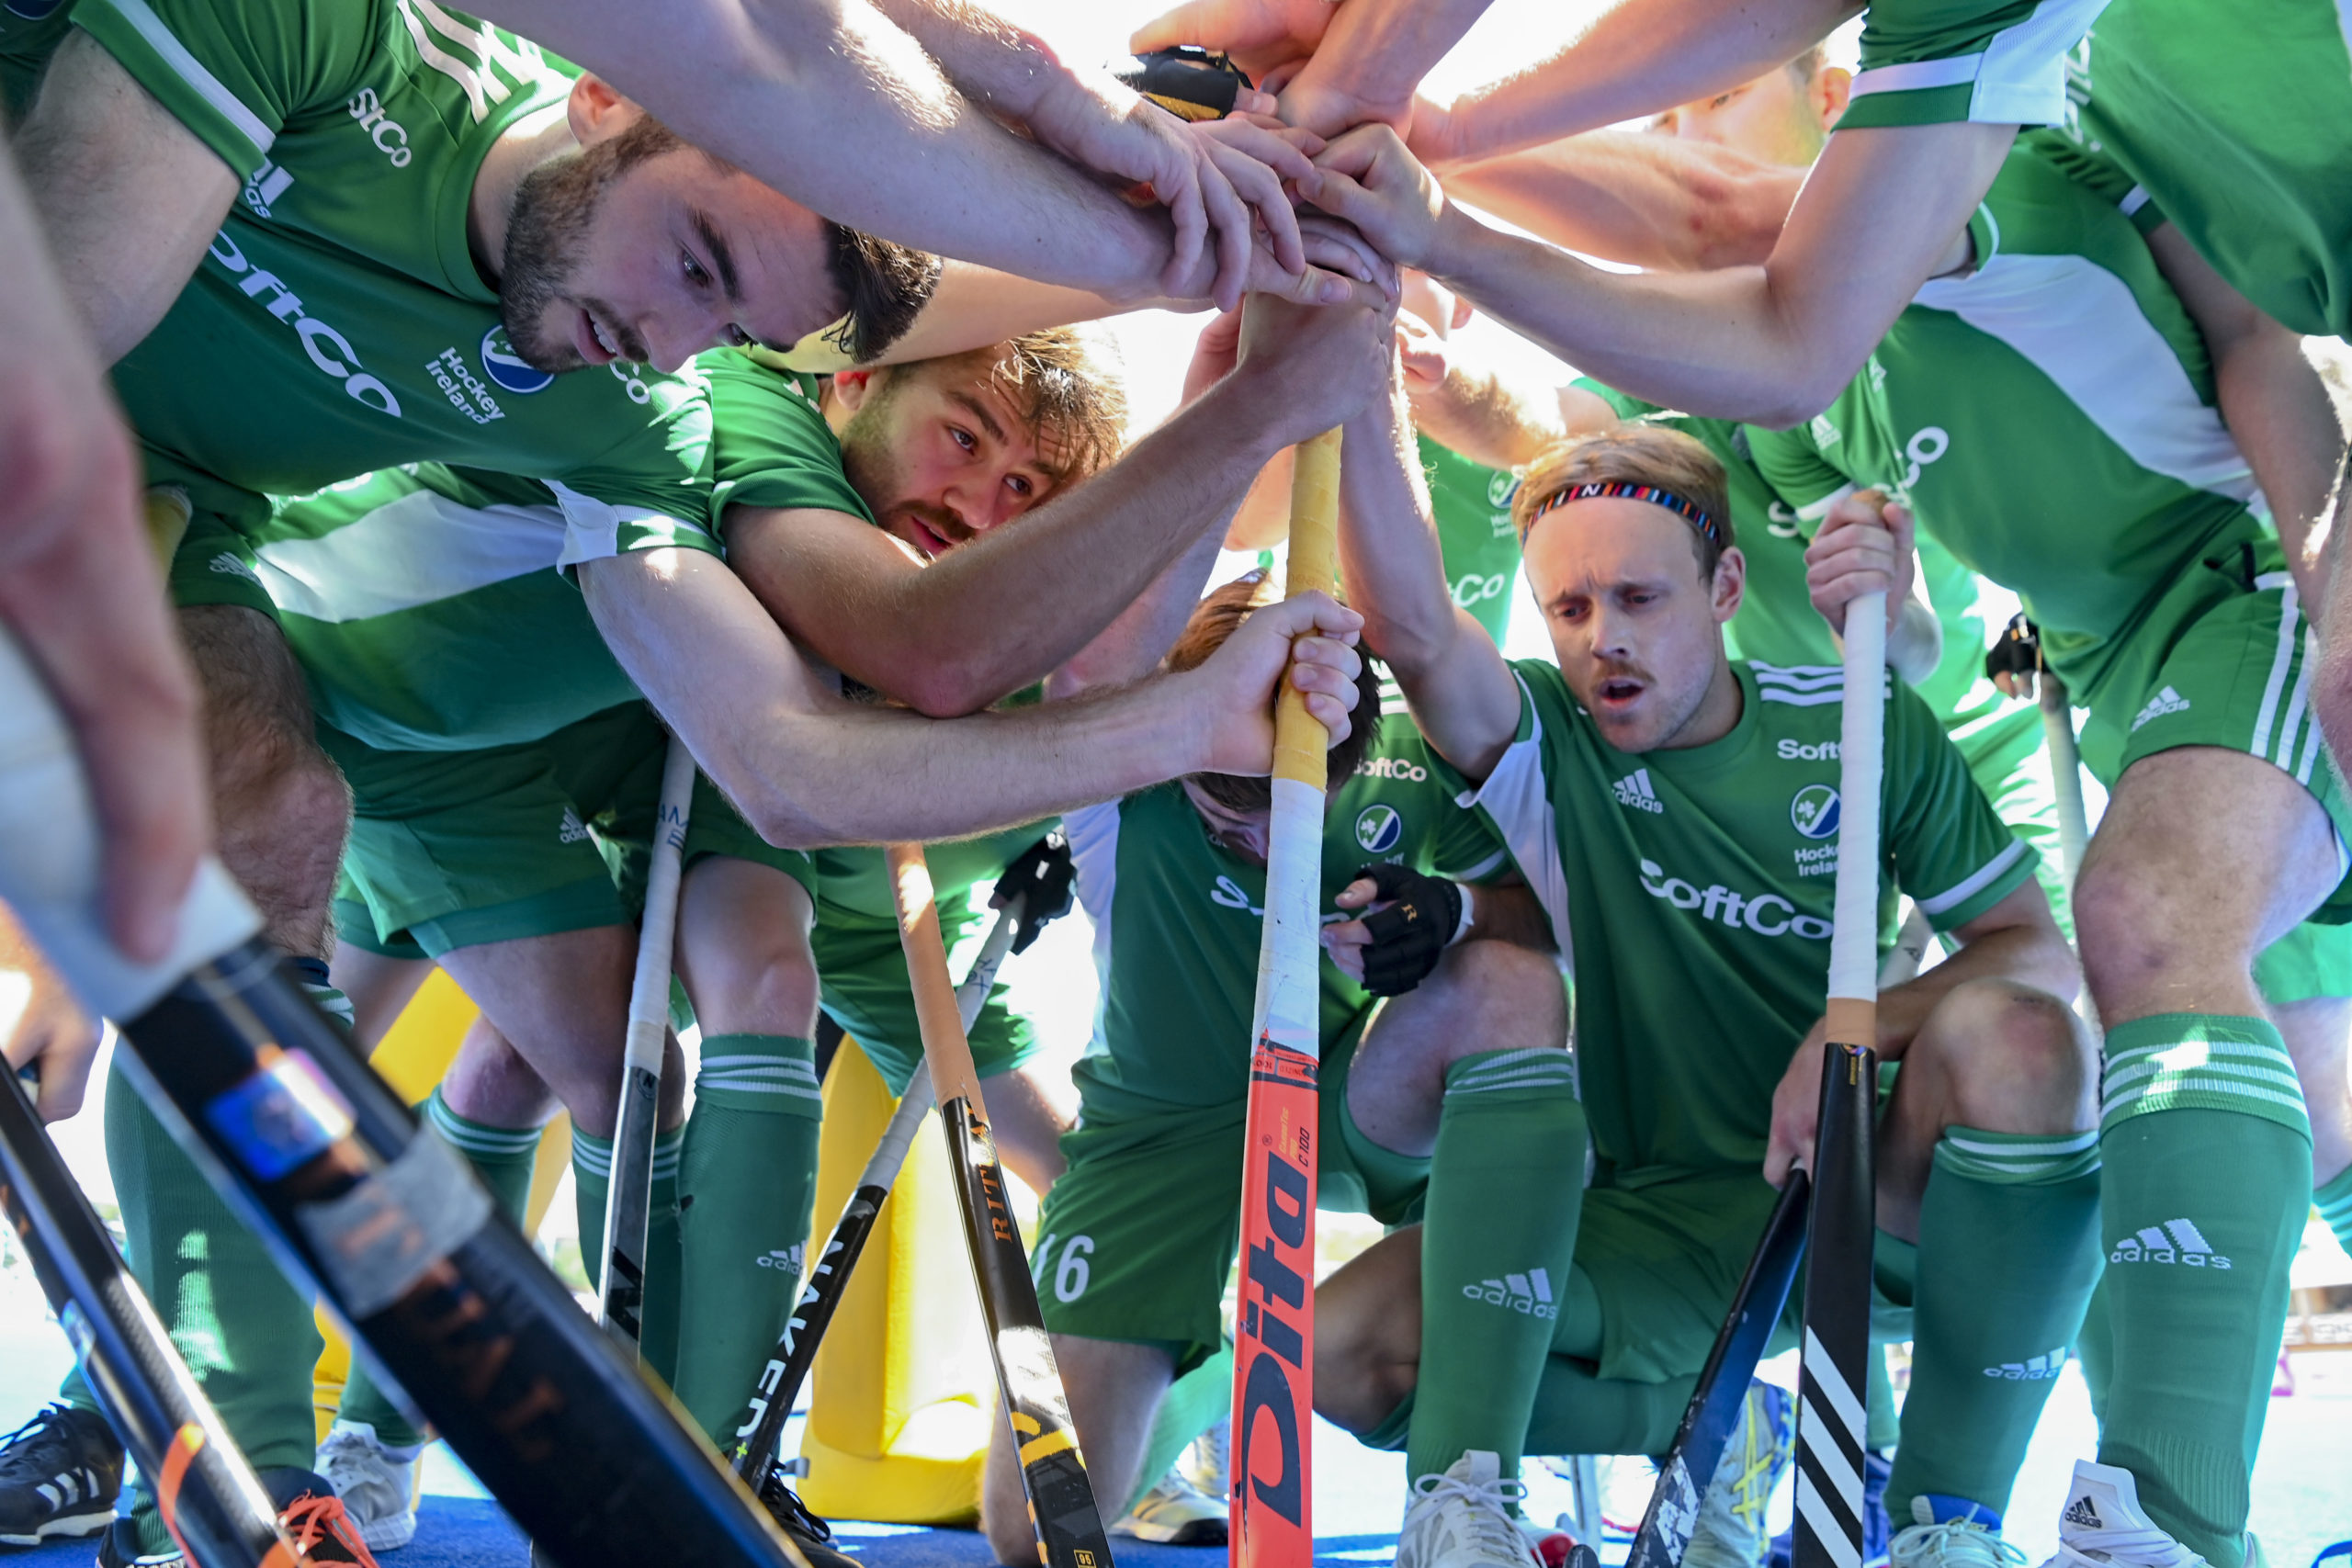 2022 1437 17041 001 c4 01 scaled - Pro League: Ireland Joins Pro League as South Africa Withdraws - Hockey Ireland is pleased to accept an invitation from the International Hockey Federation, FIH, for the Ireland Men’s Senior Squad to join the FIH Hockey Men’s Pro League next season.Ireland finished runners-up to South Africa in the inaugural FIH Nations Cup tournament last November, losing a thrilling final 4-3.